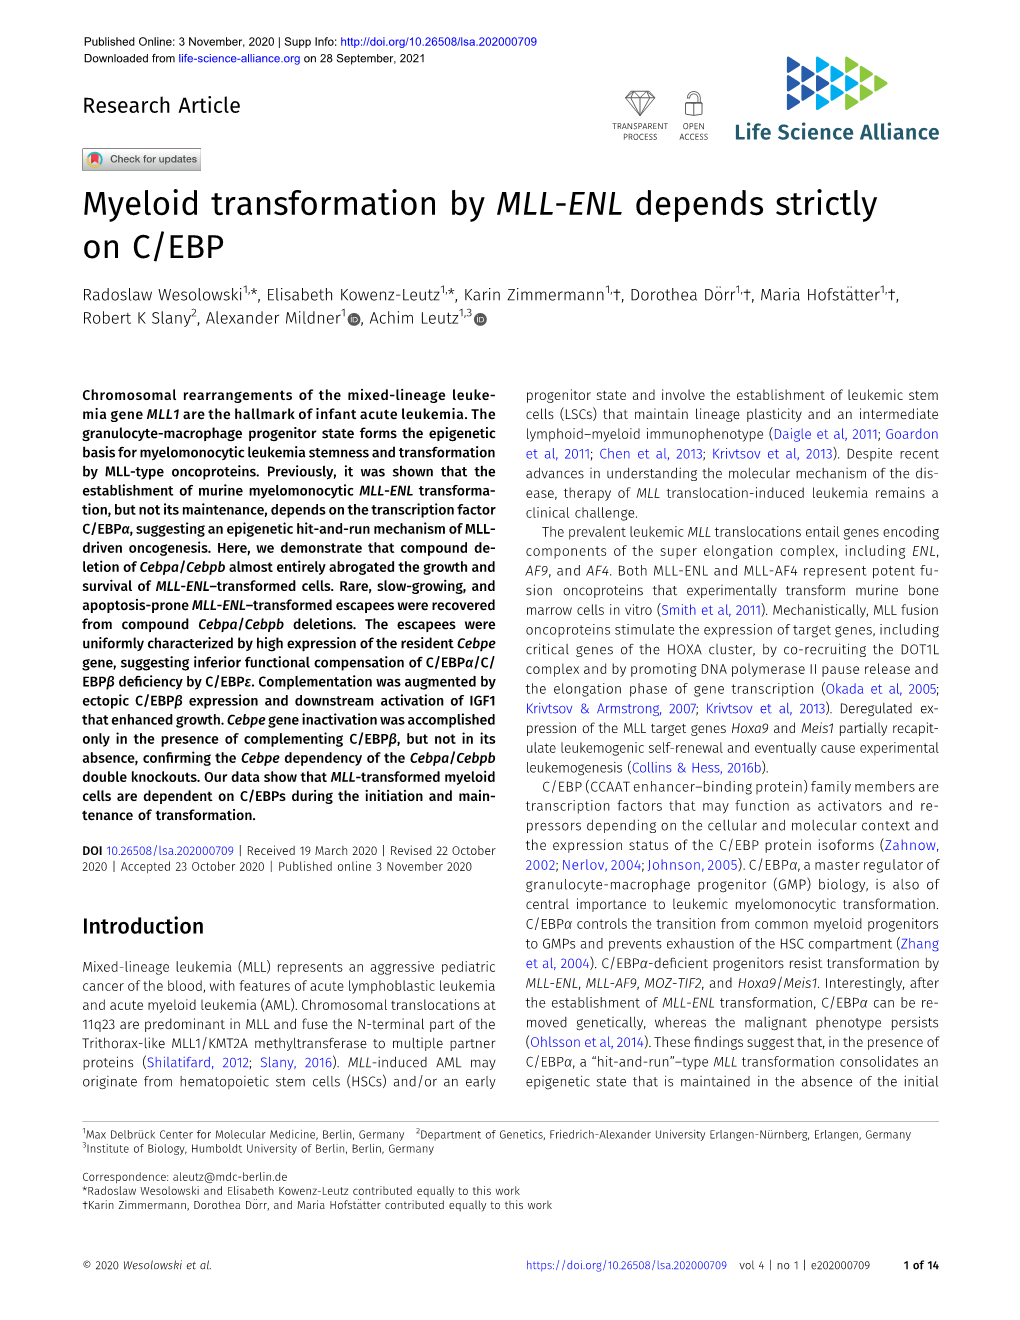 Myeloid Transformation by MLL-ENL Depends Strictly on C/EBP